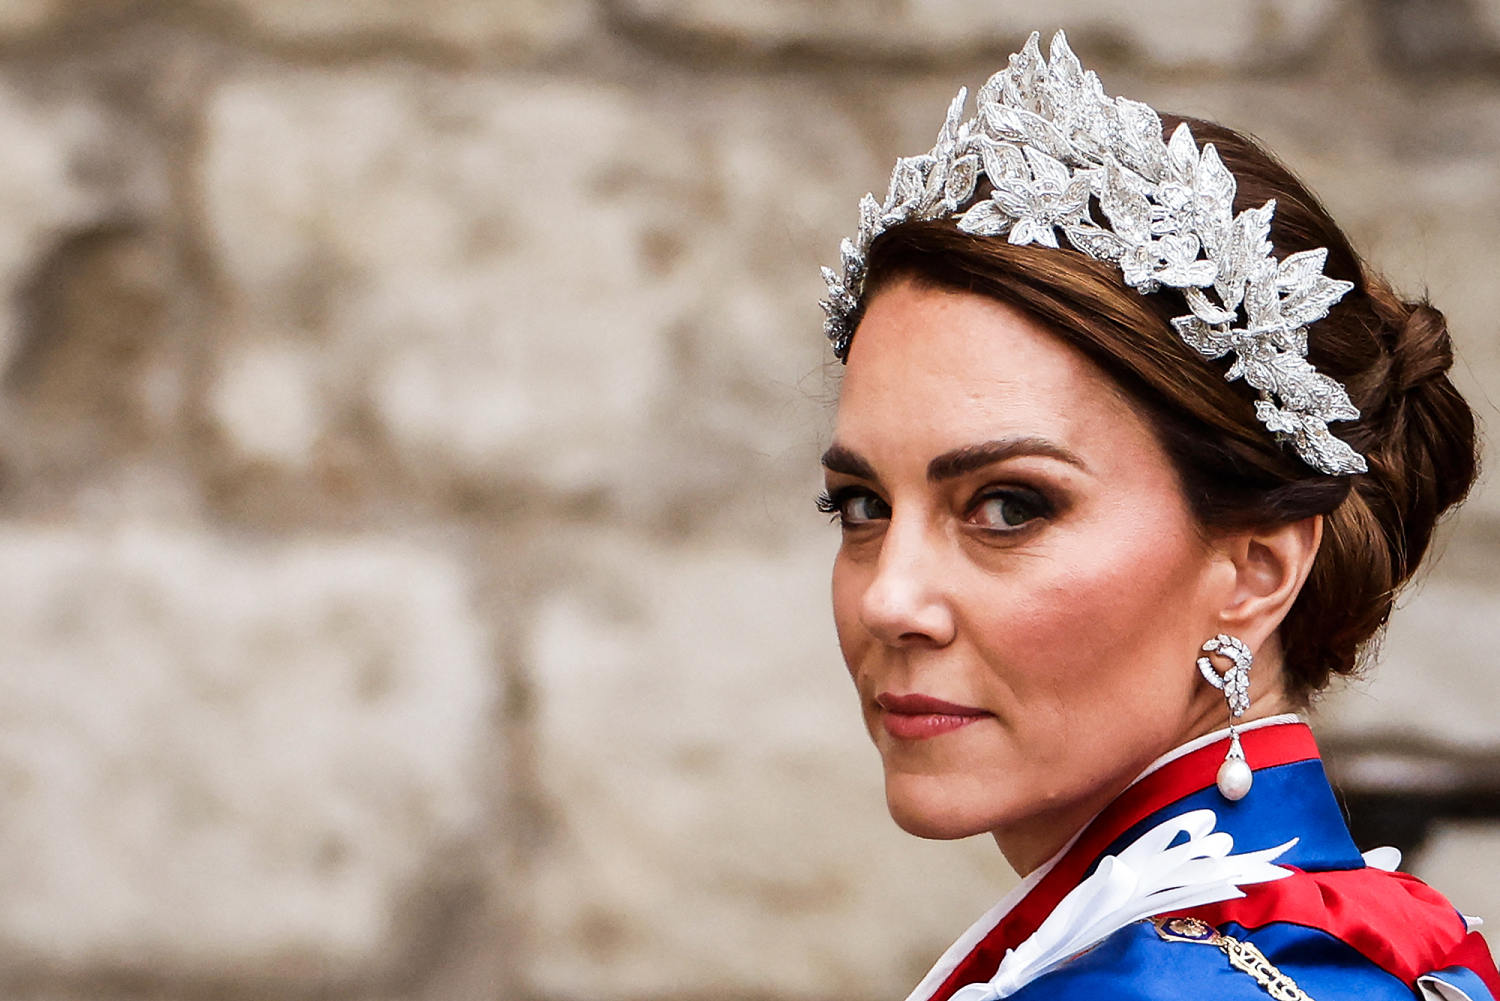 Princess Kate has a new title that marks a first for the royal family